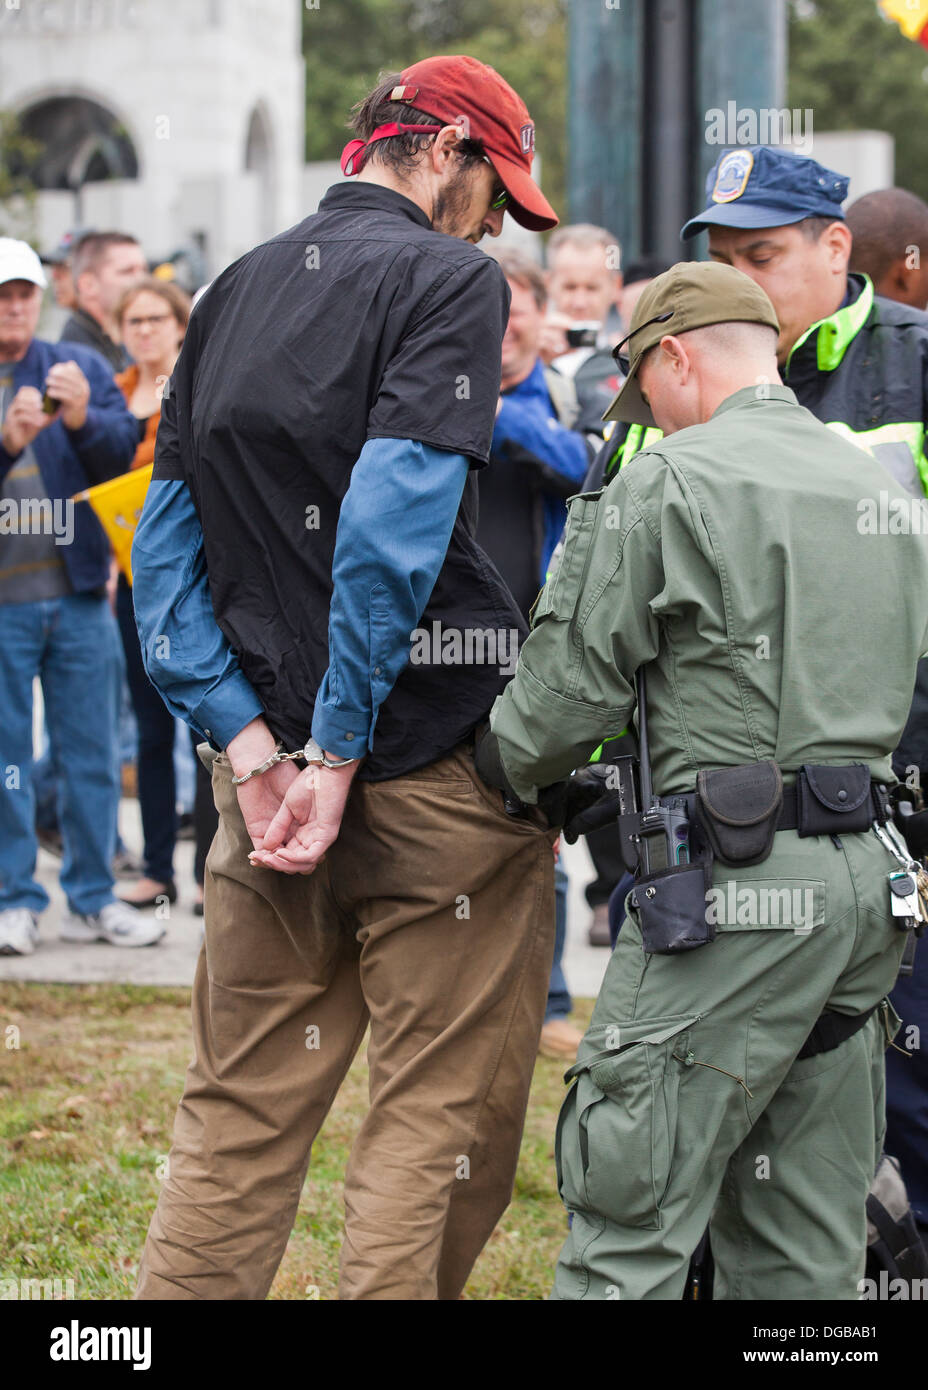 Man detained, placed under arrest and in handcuffs by police - Washington, DC USA Stock Photo